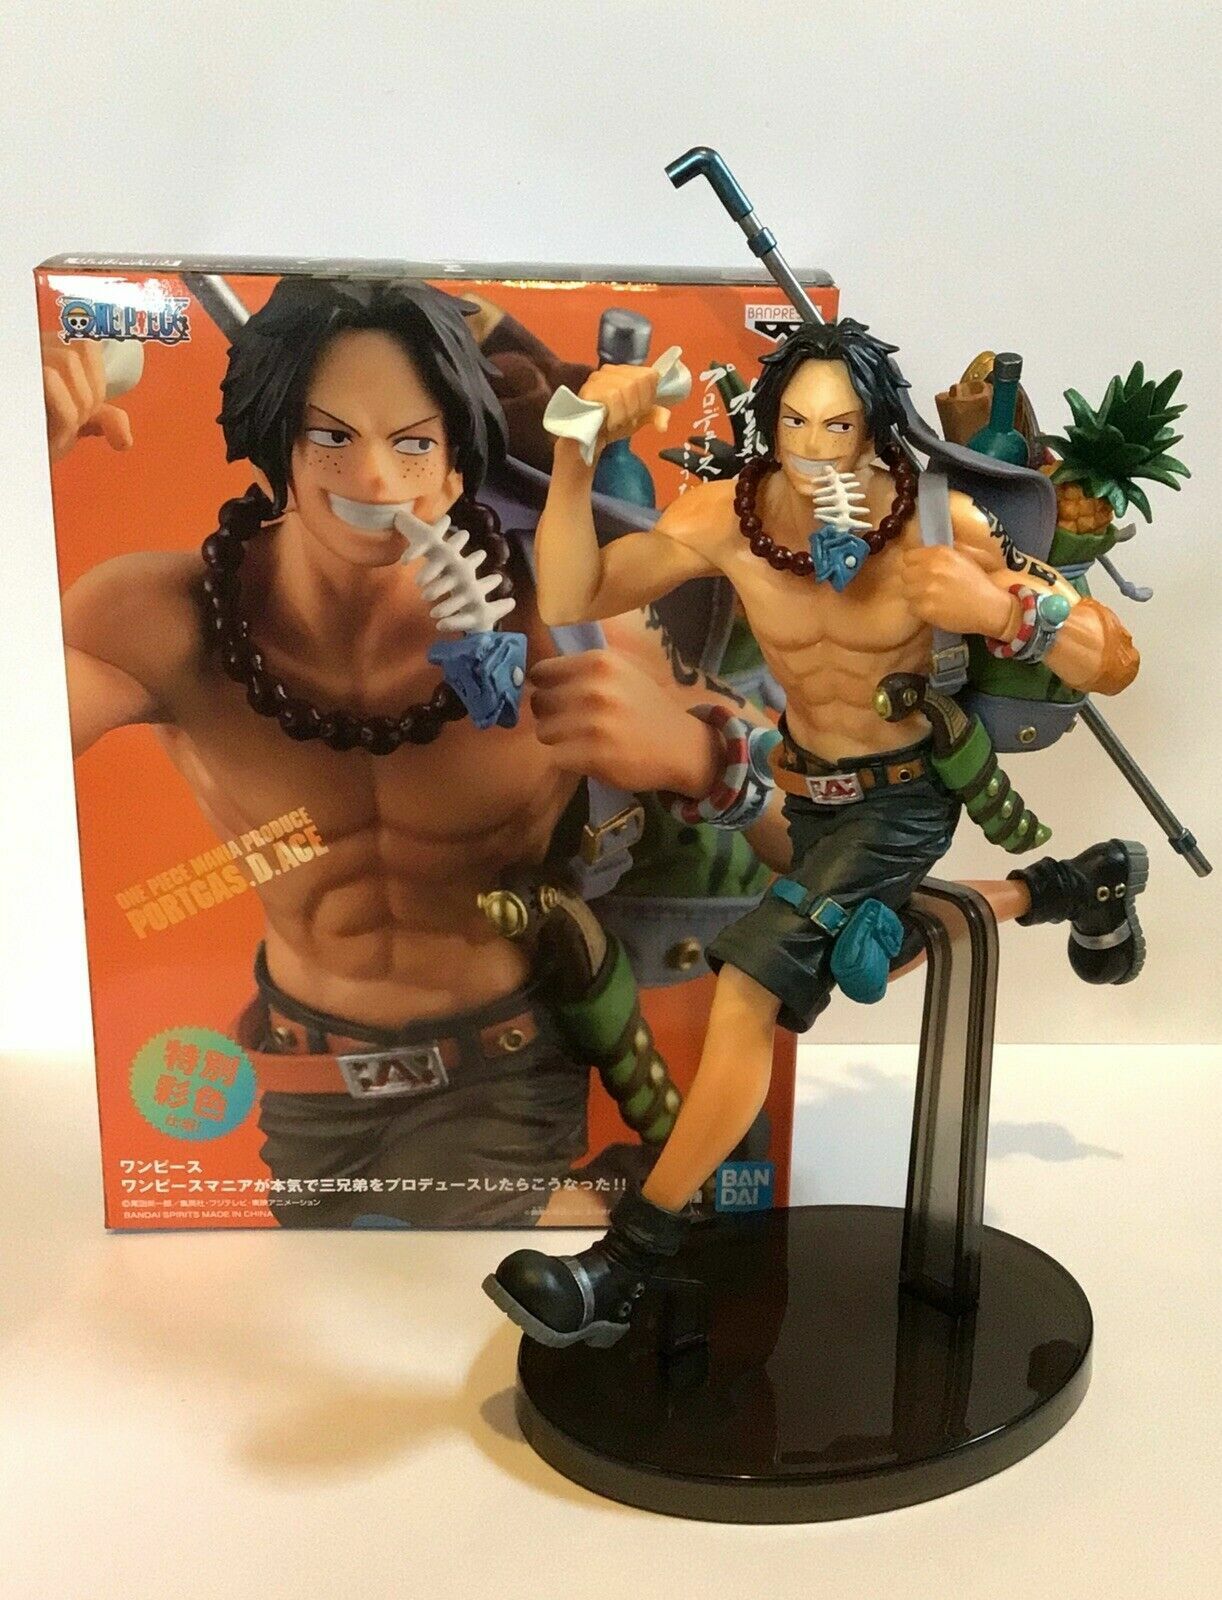 PORTGAS D. ACE ONE PIECE EATING FISH RUNNING FIGURE STATUE 